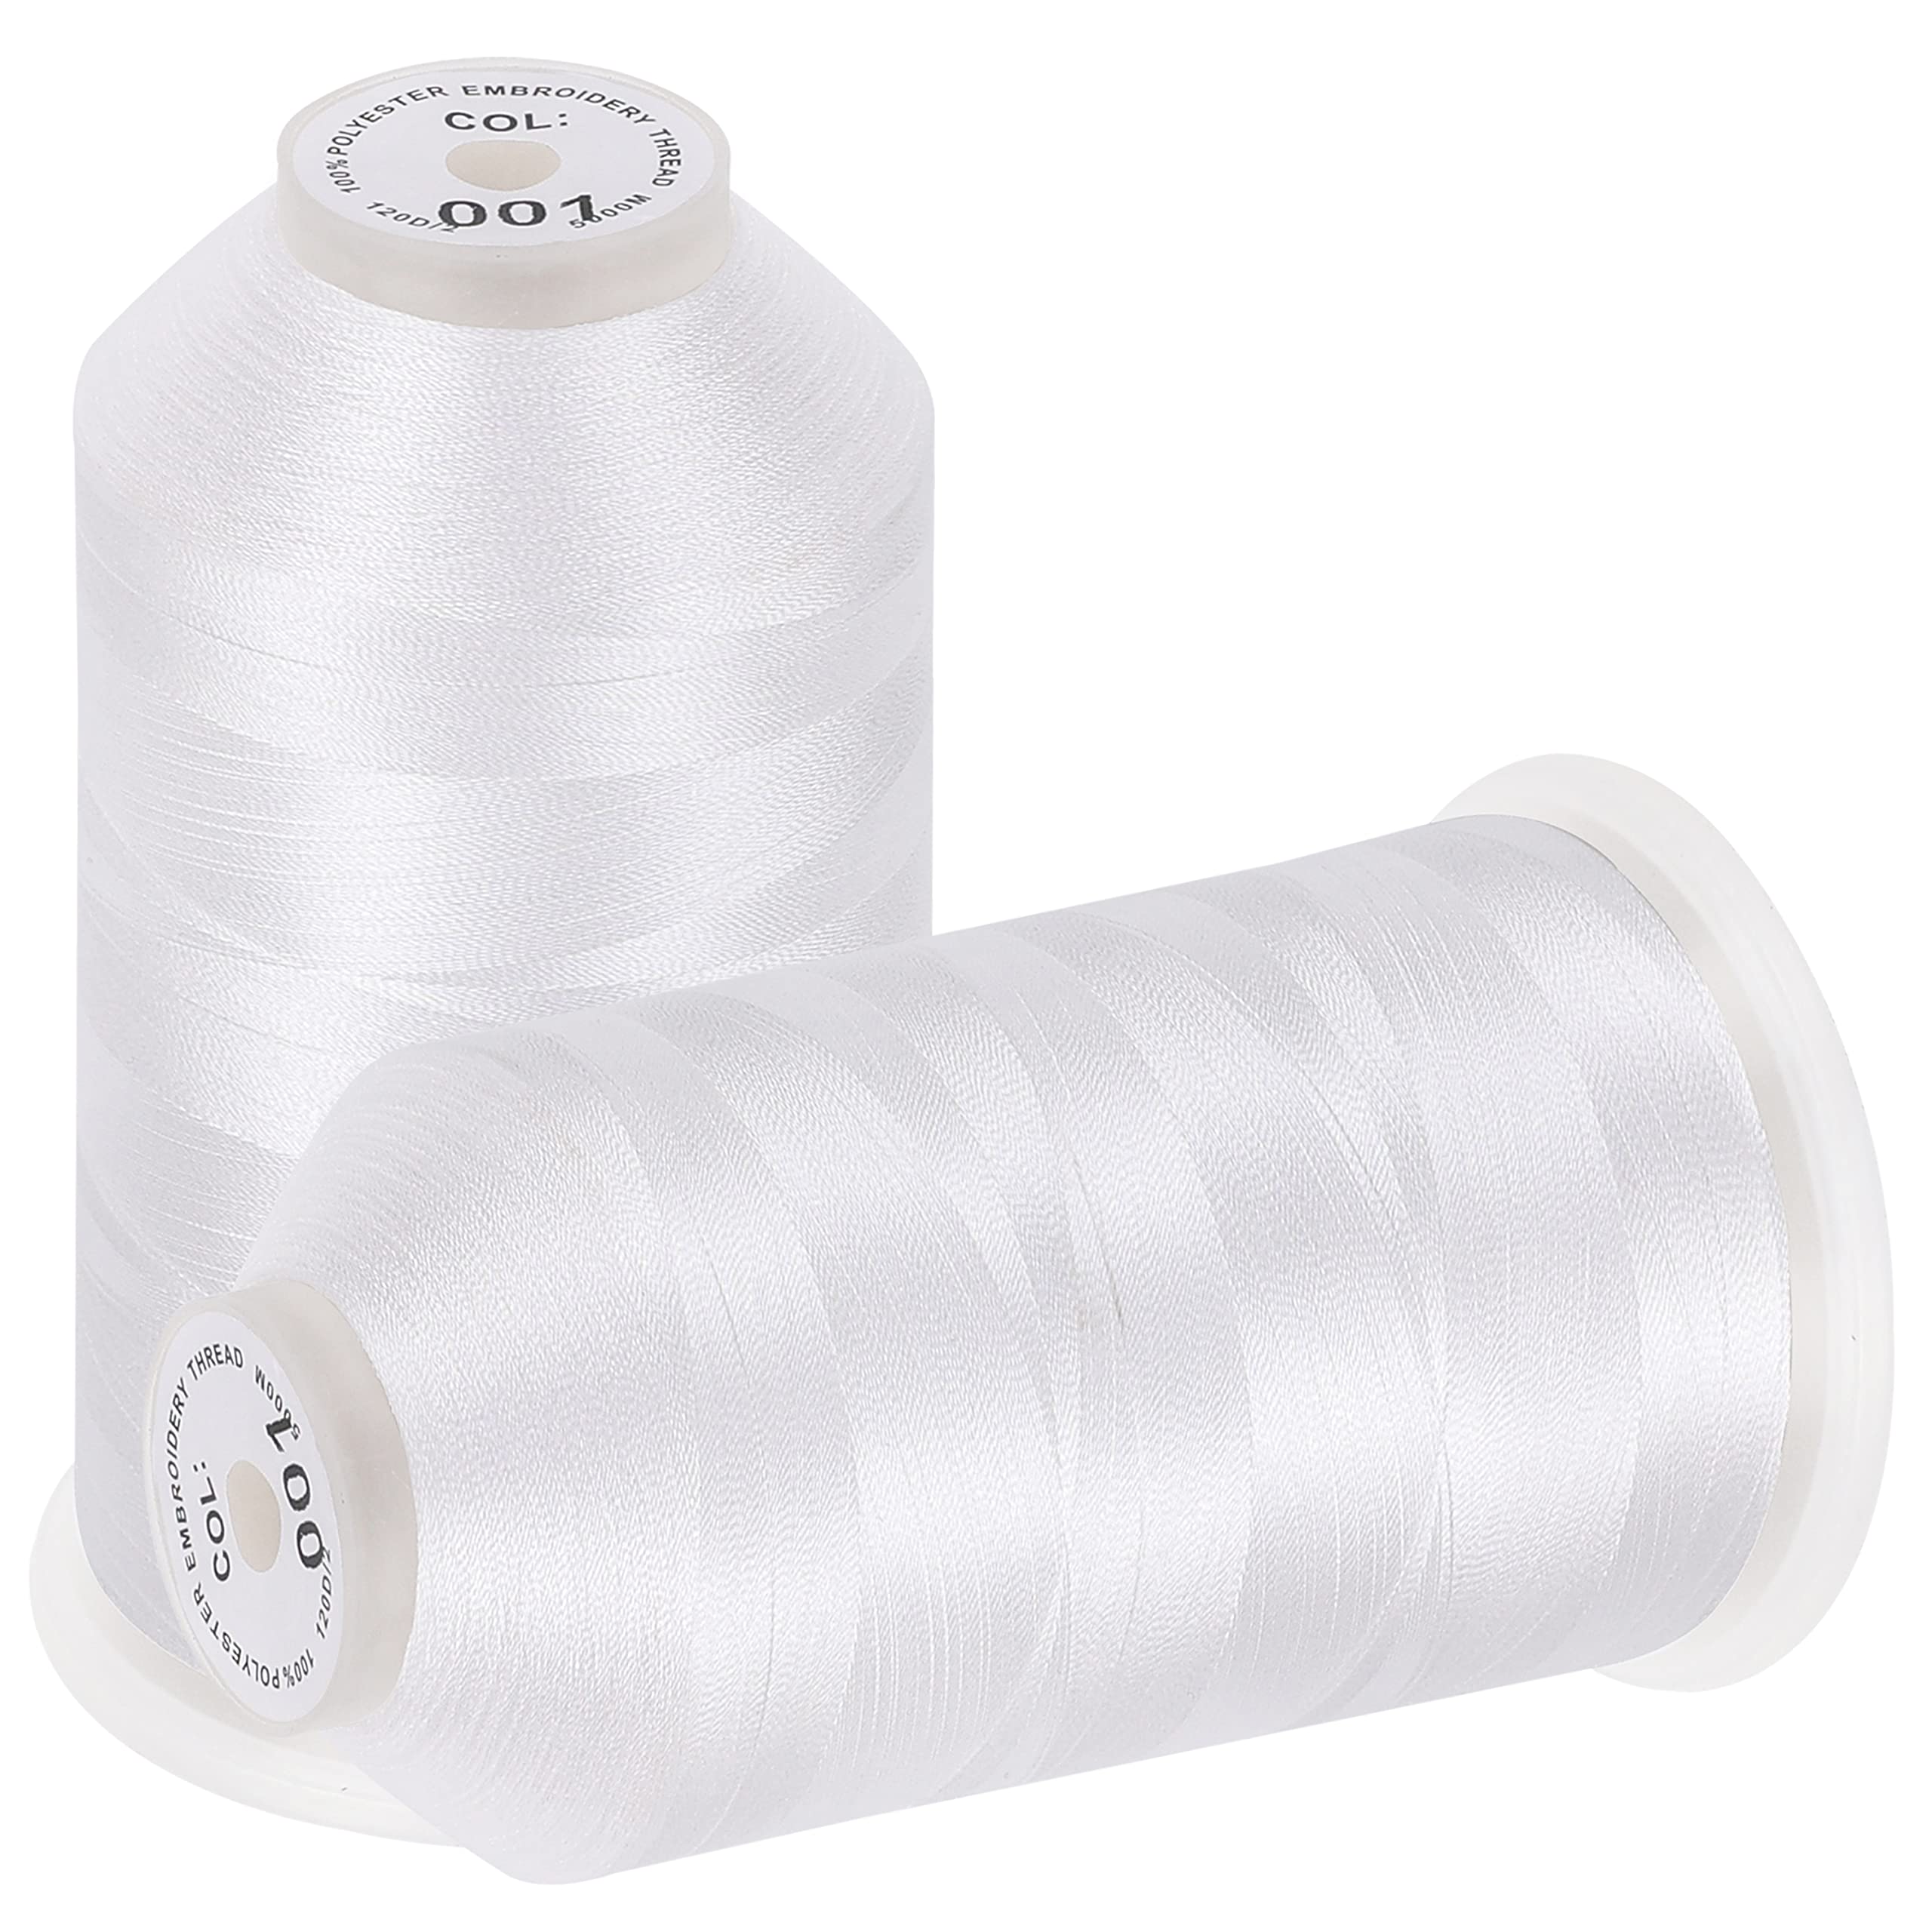 120D/2 Spool Polyester Embroidery Machine Thread